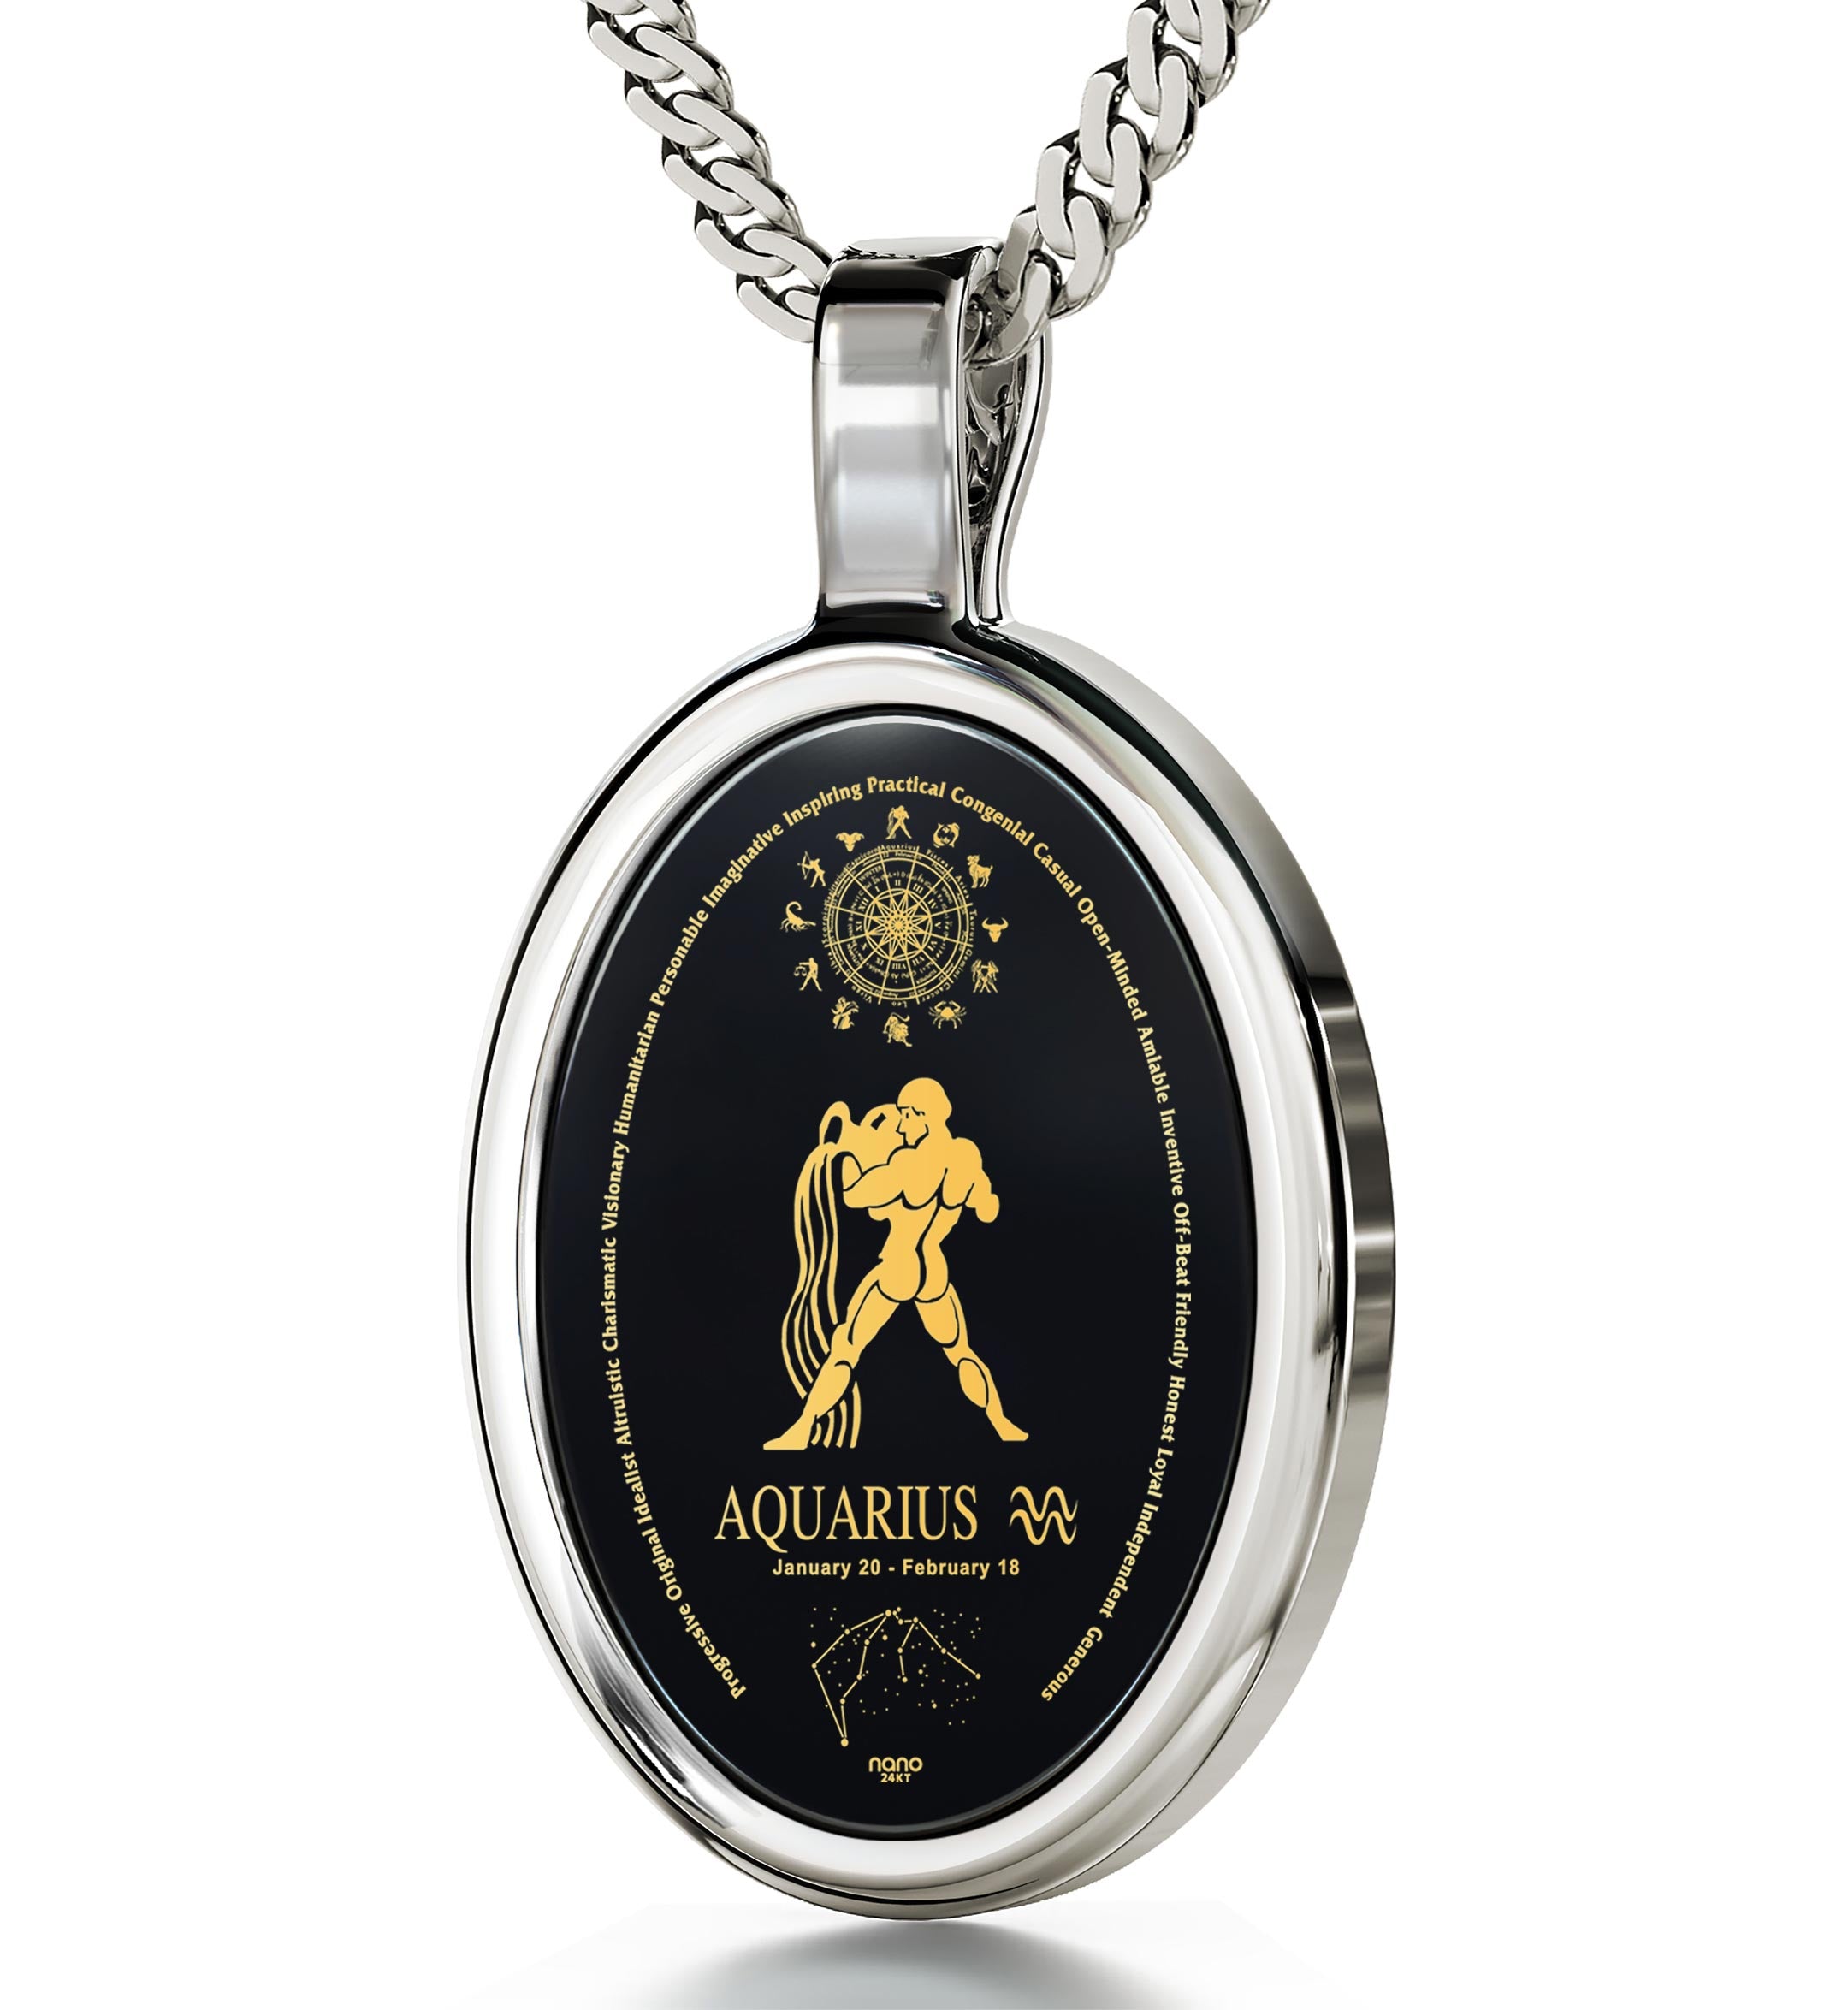 Gold Aquarius Jewelry Gift Necklace World\'s Inscribed Only NanoStyle | Unique 24k - Zodiac